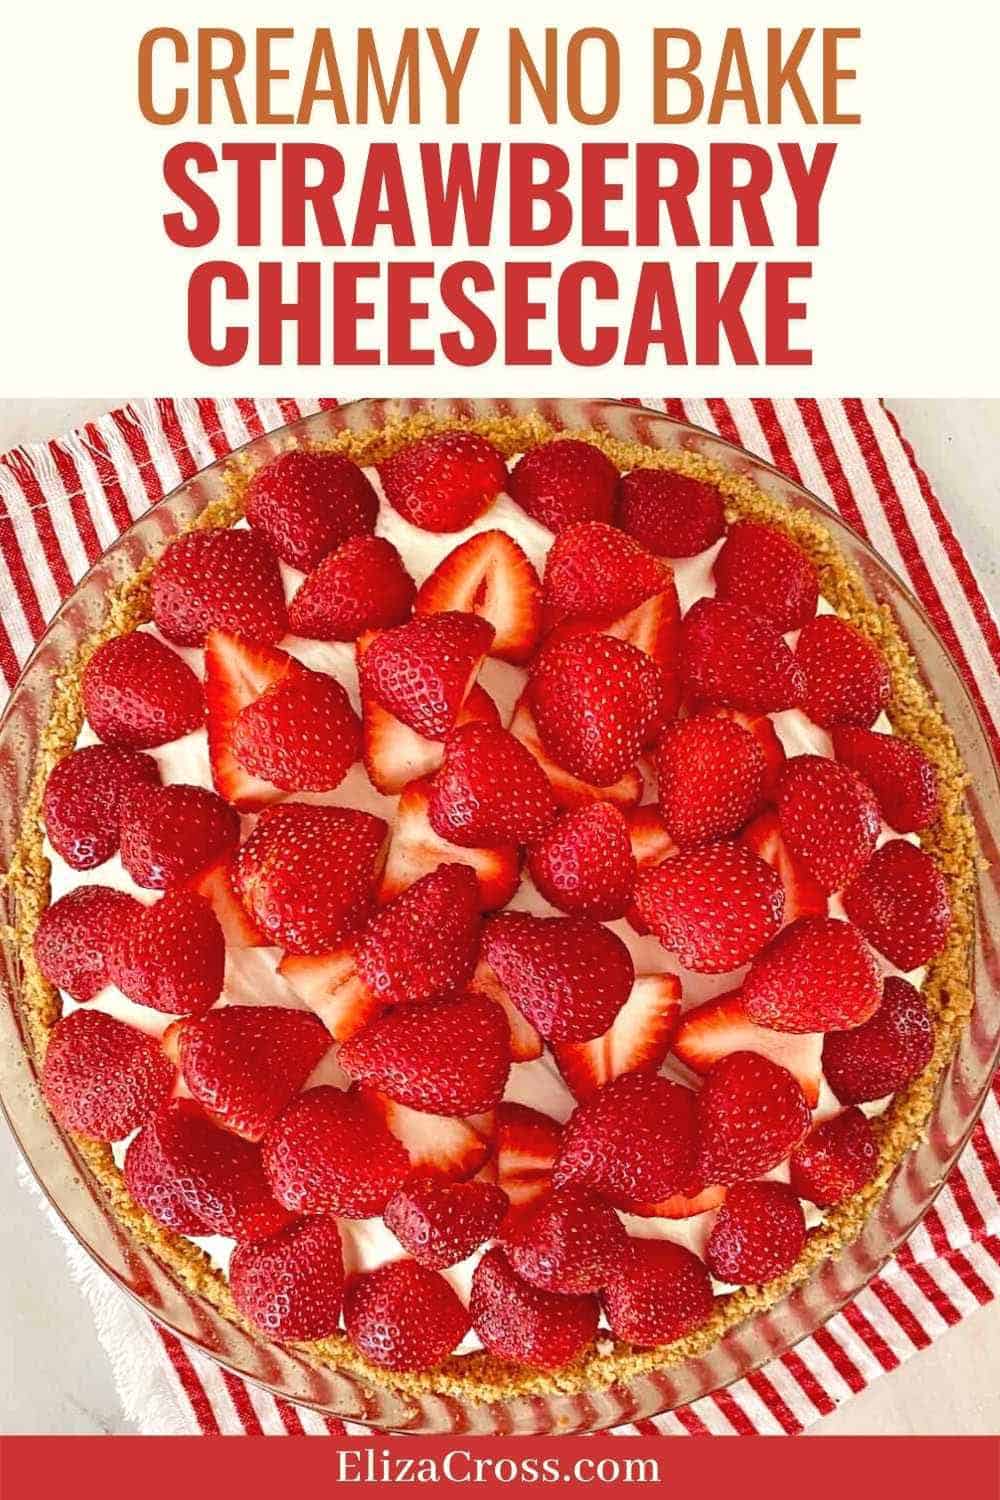 Looking down on a prepared no bake cheesecake with strawberries on a read and white striped napkin.